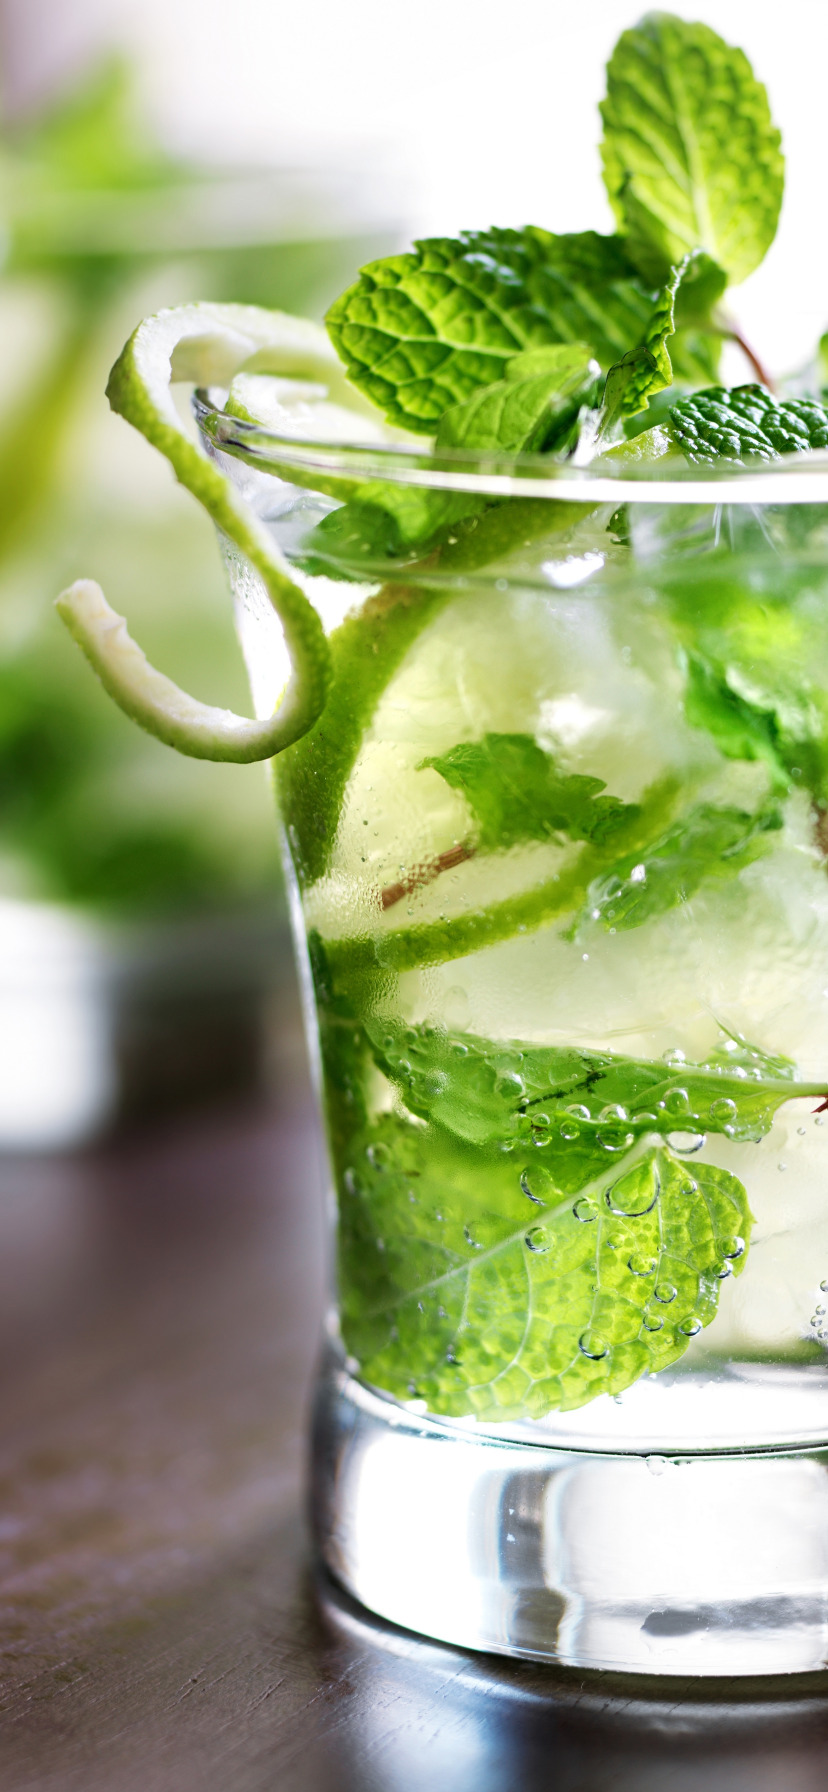 ice, cocktail, lime, ice, cocktail, lime, mint leaves, mint leaves